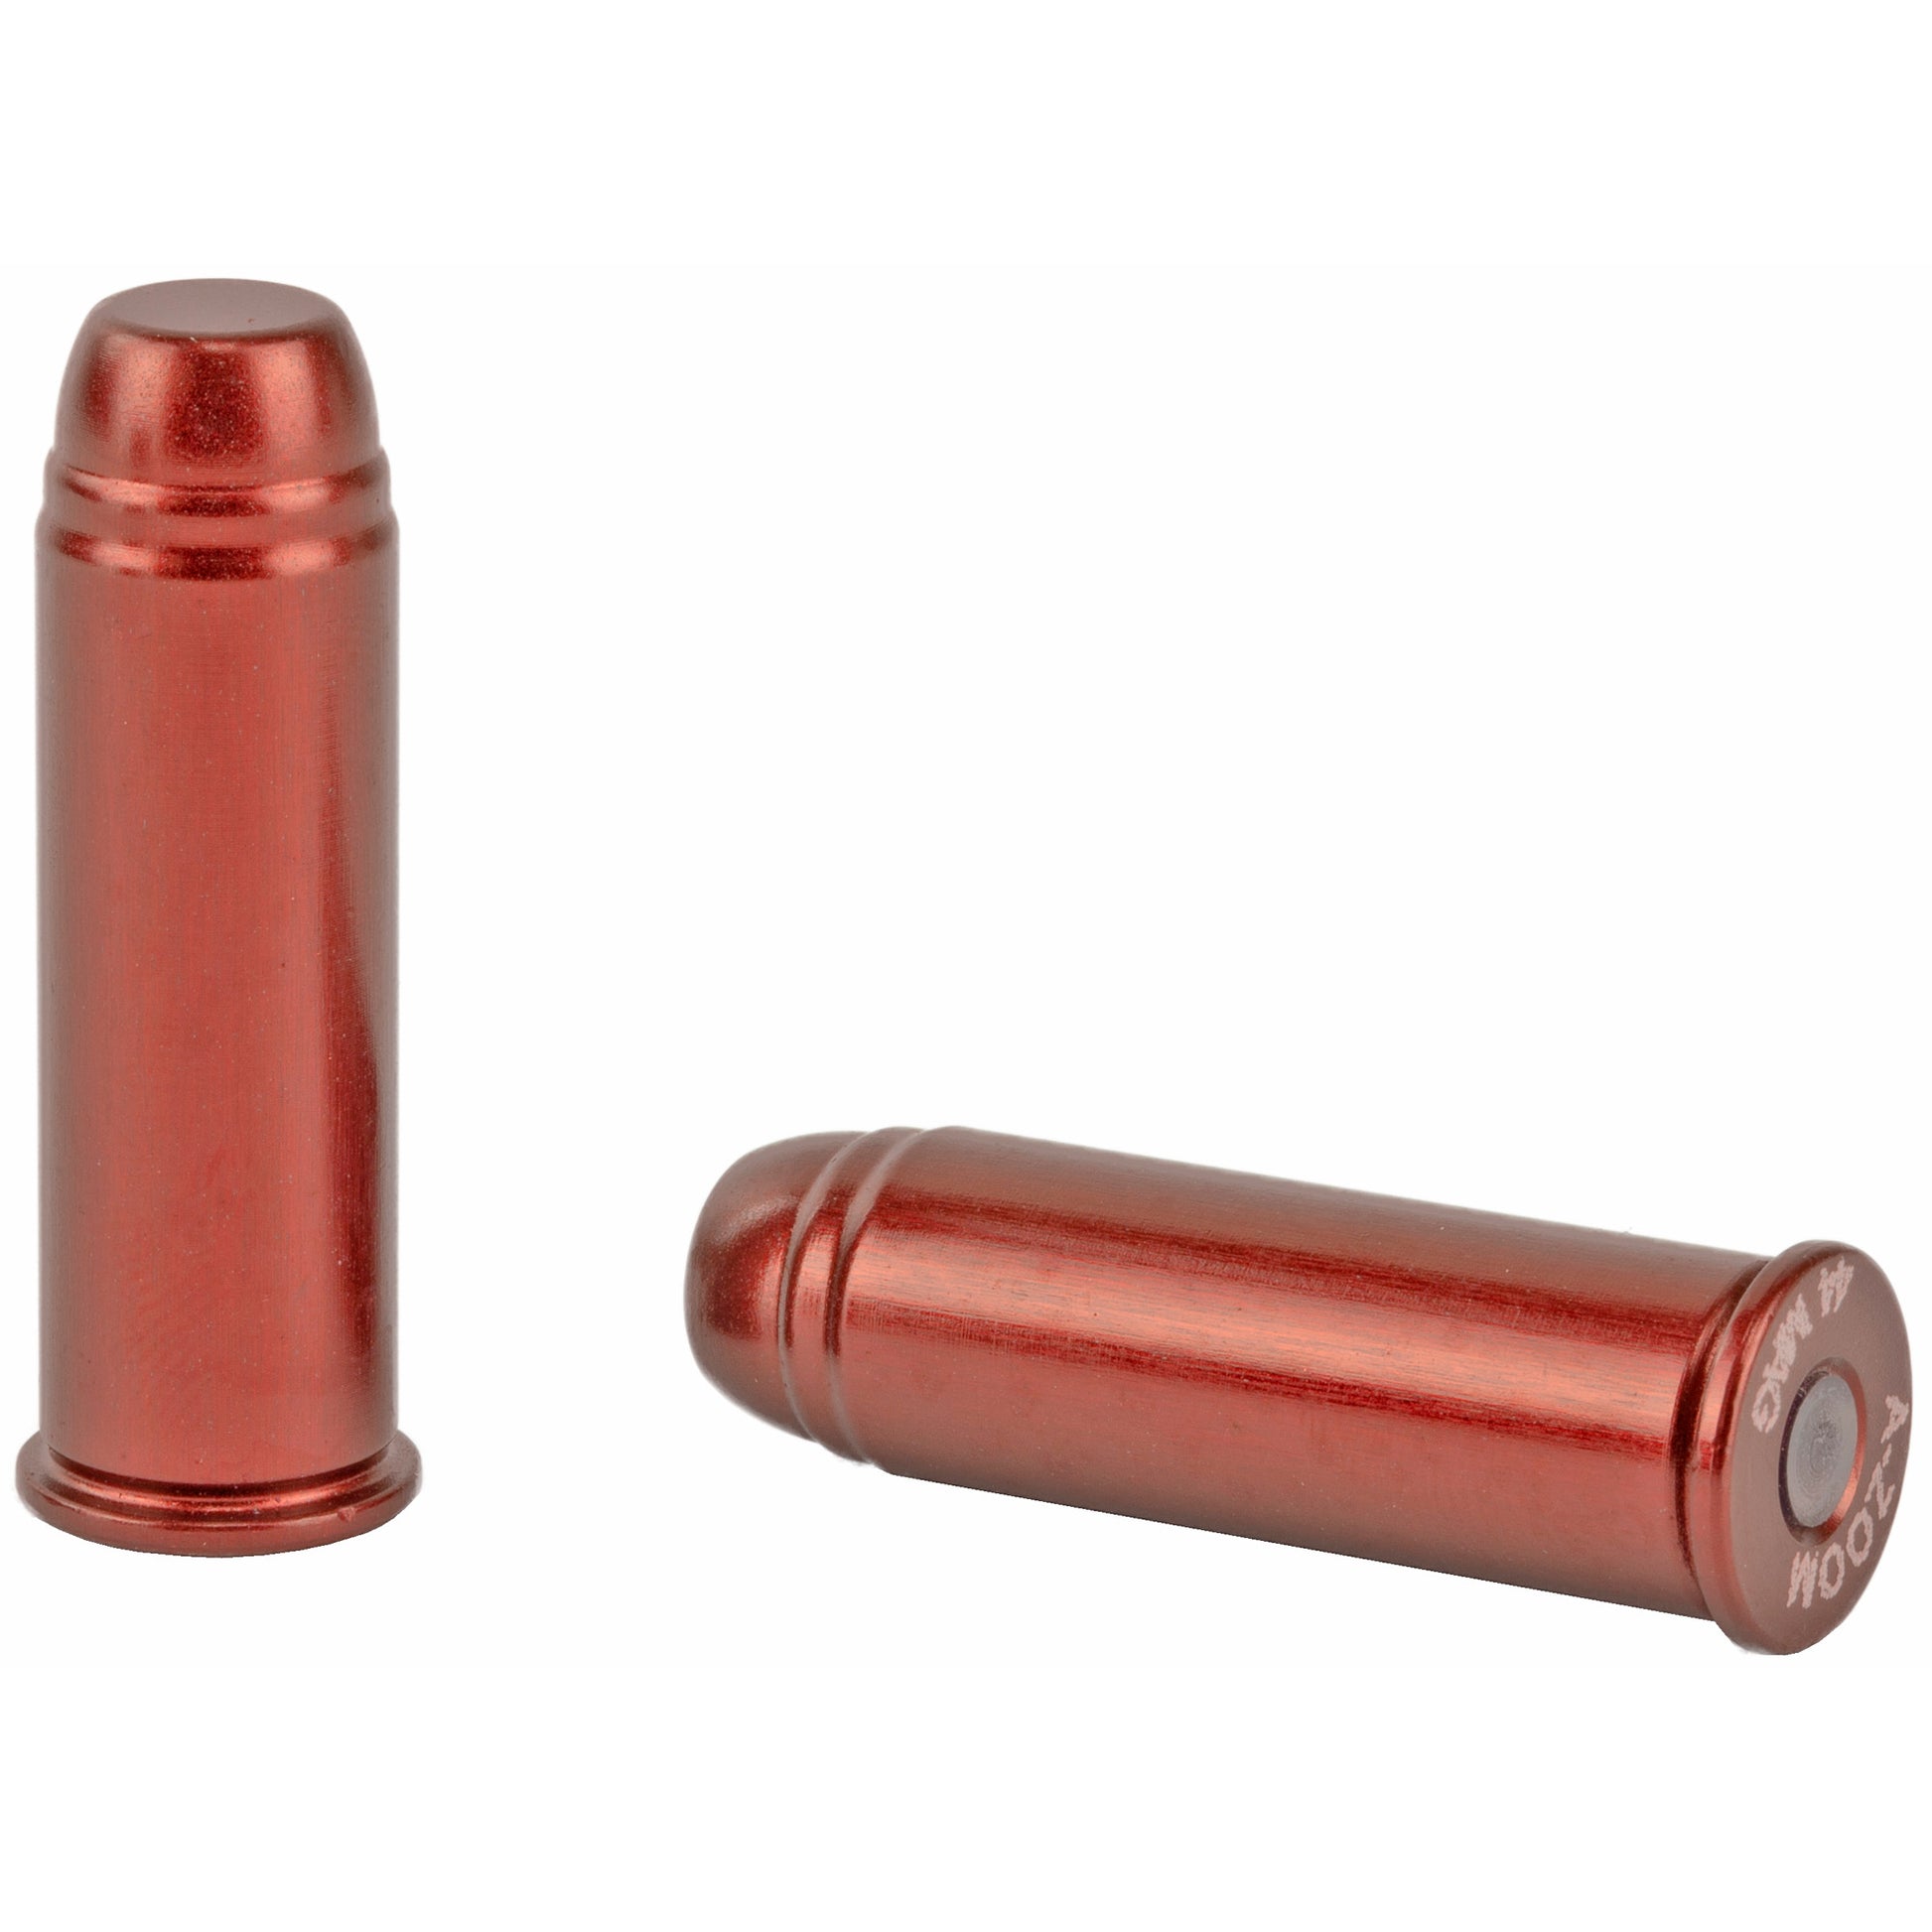 A-Zoom Snap Caps safety training 44 Magnum 6 Pack solid aluminum 16120 - California Shooting Supplies